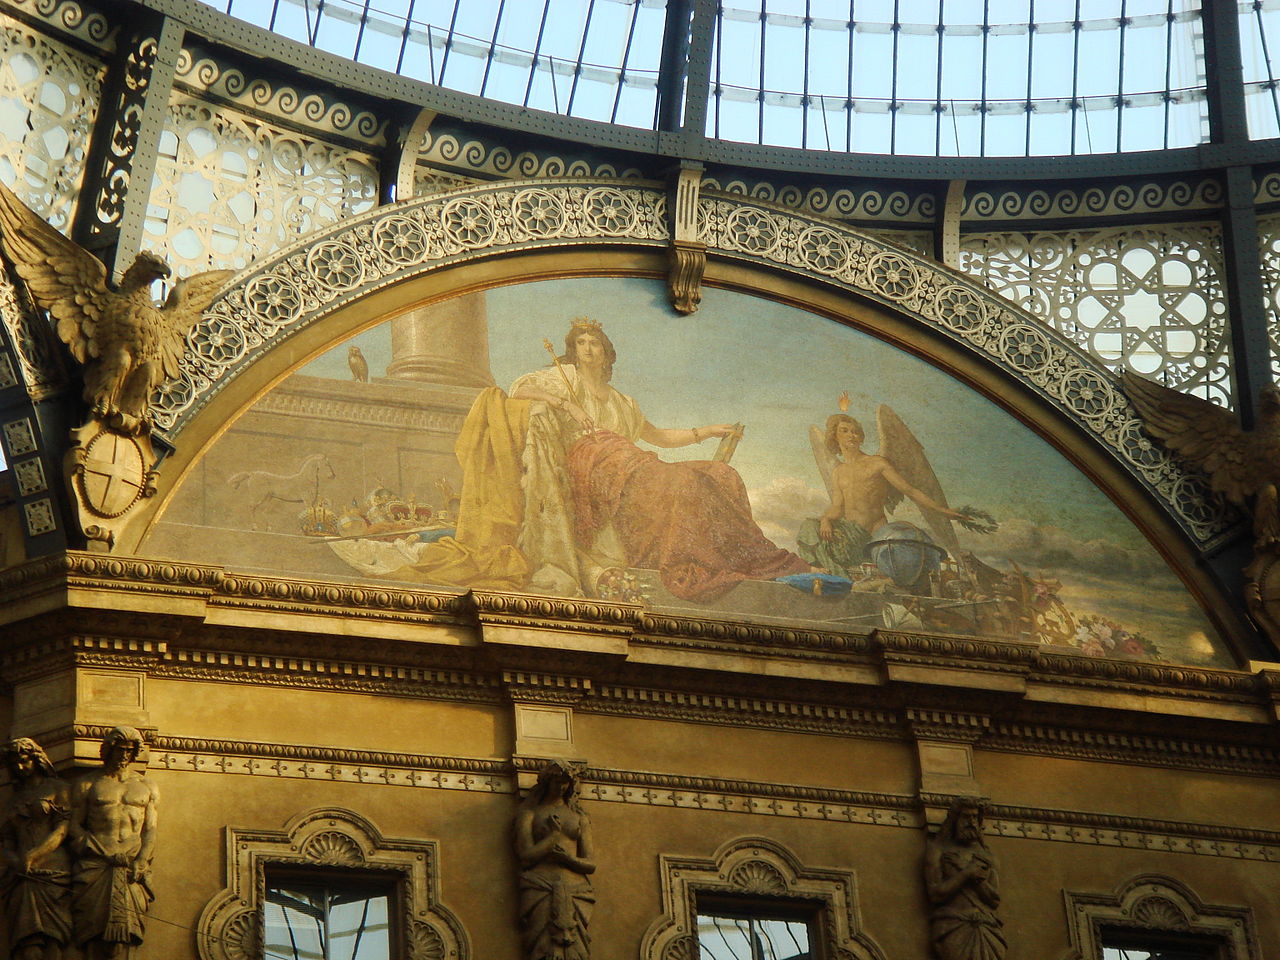 Allegorical mosaic Europe and her Genius Gallery Vittorio Emanuele II in Milan Italy by Giovanni DallOrto